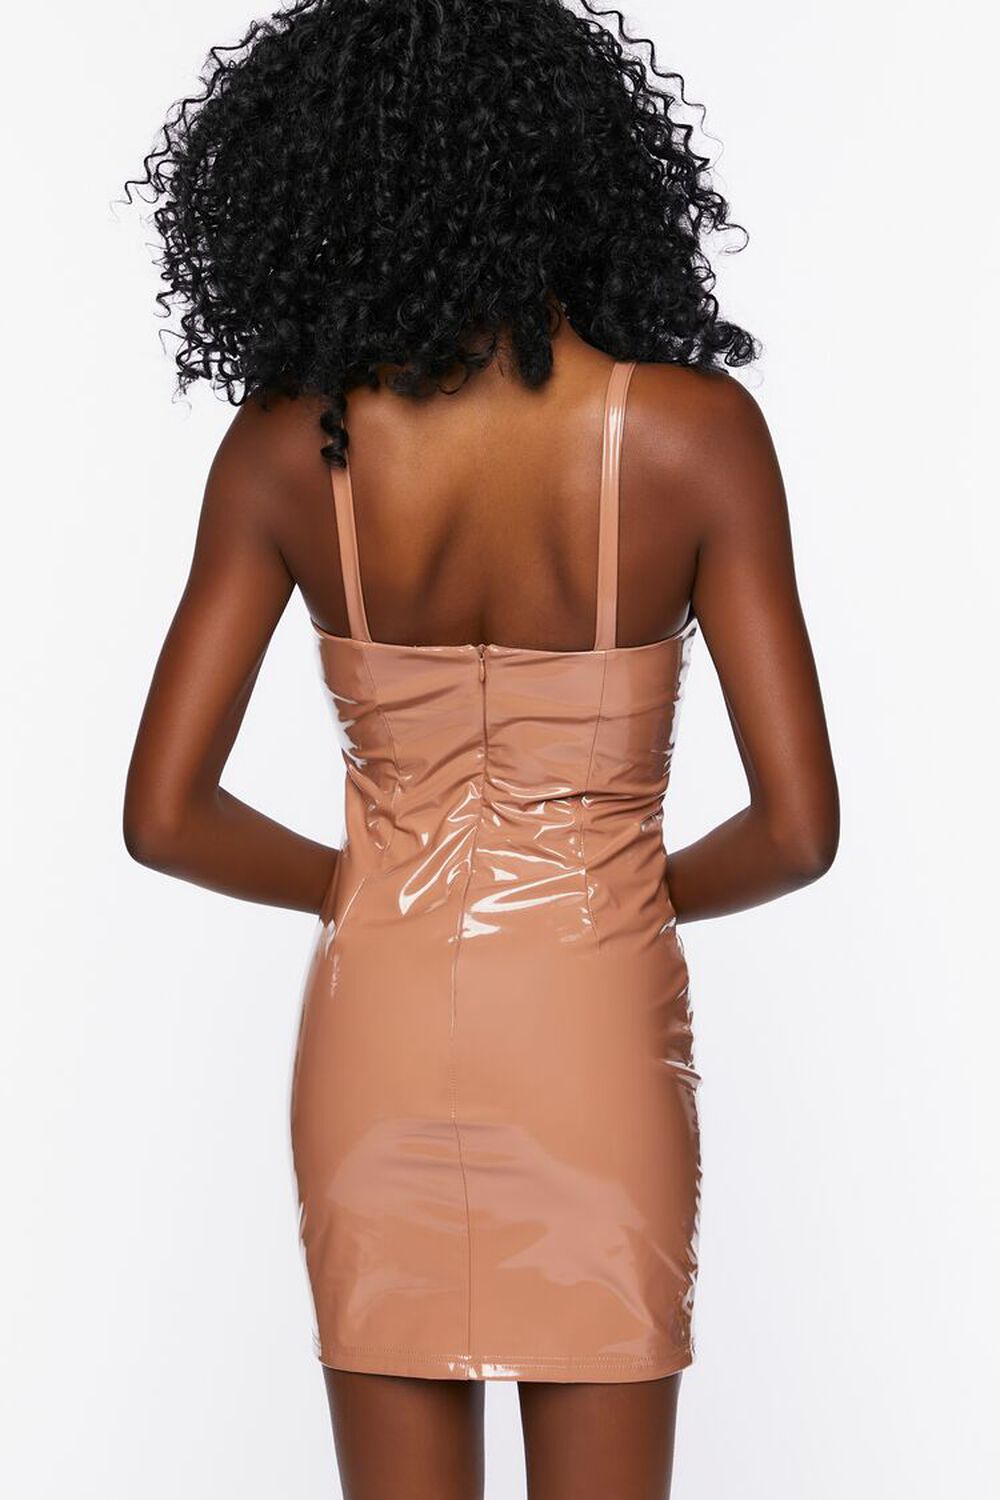 COCOA Faux Patent Leather Bodycon Dress, image 3